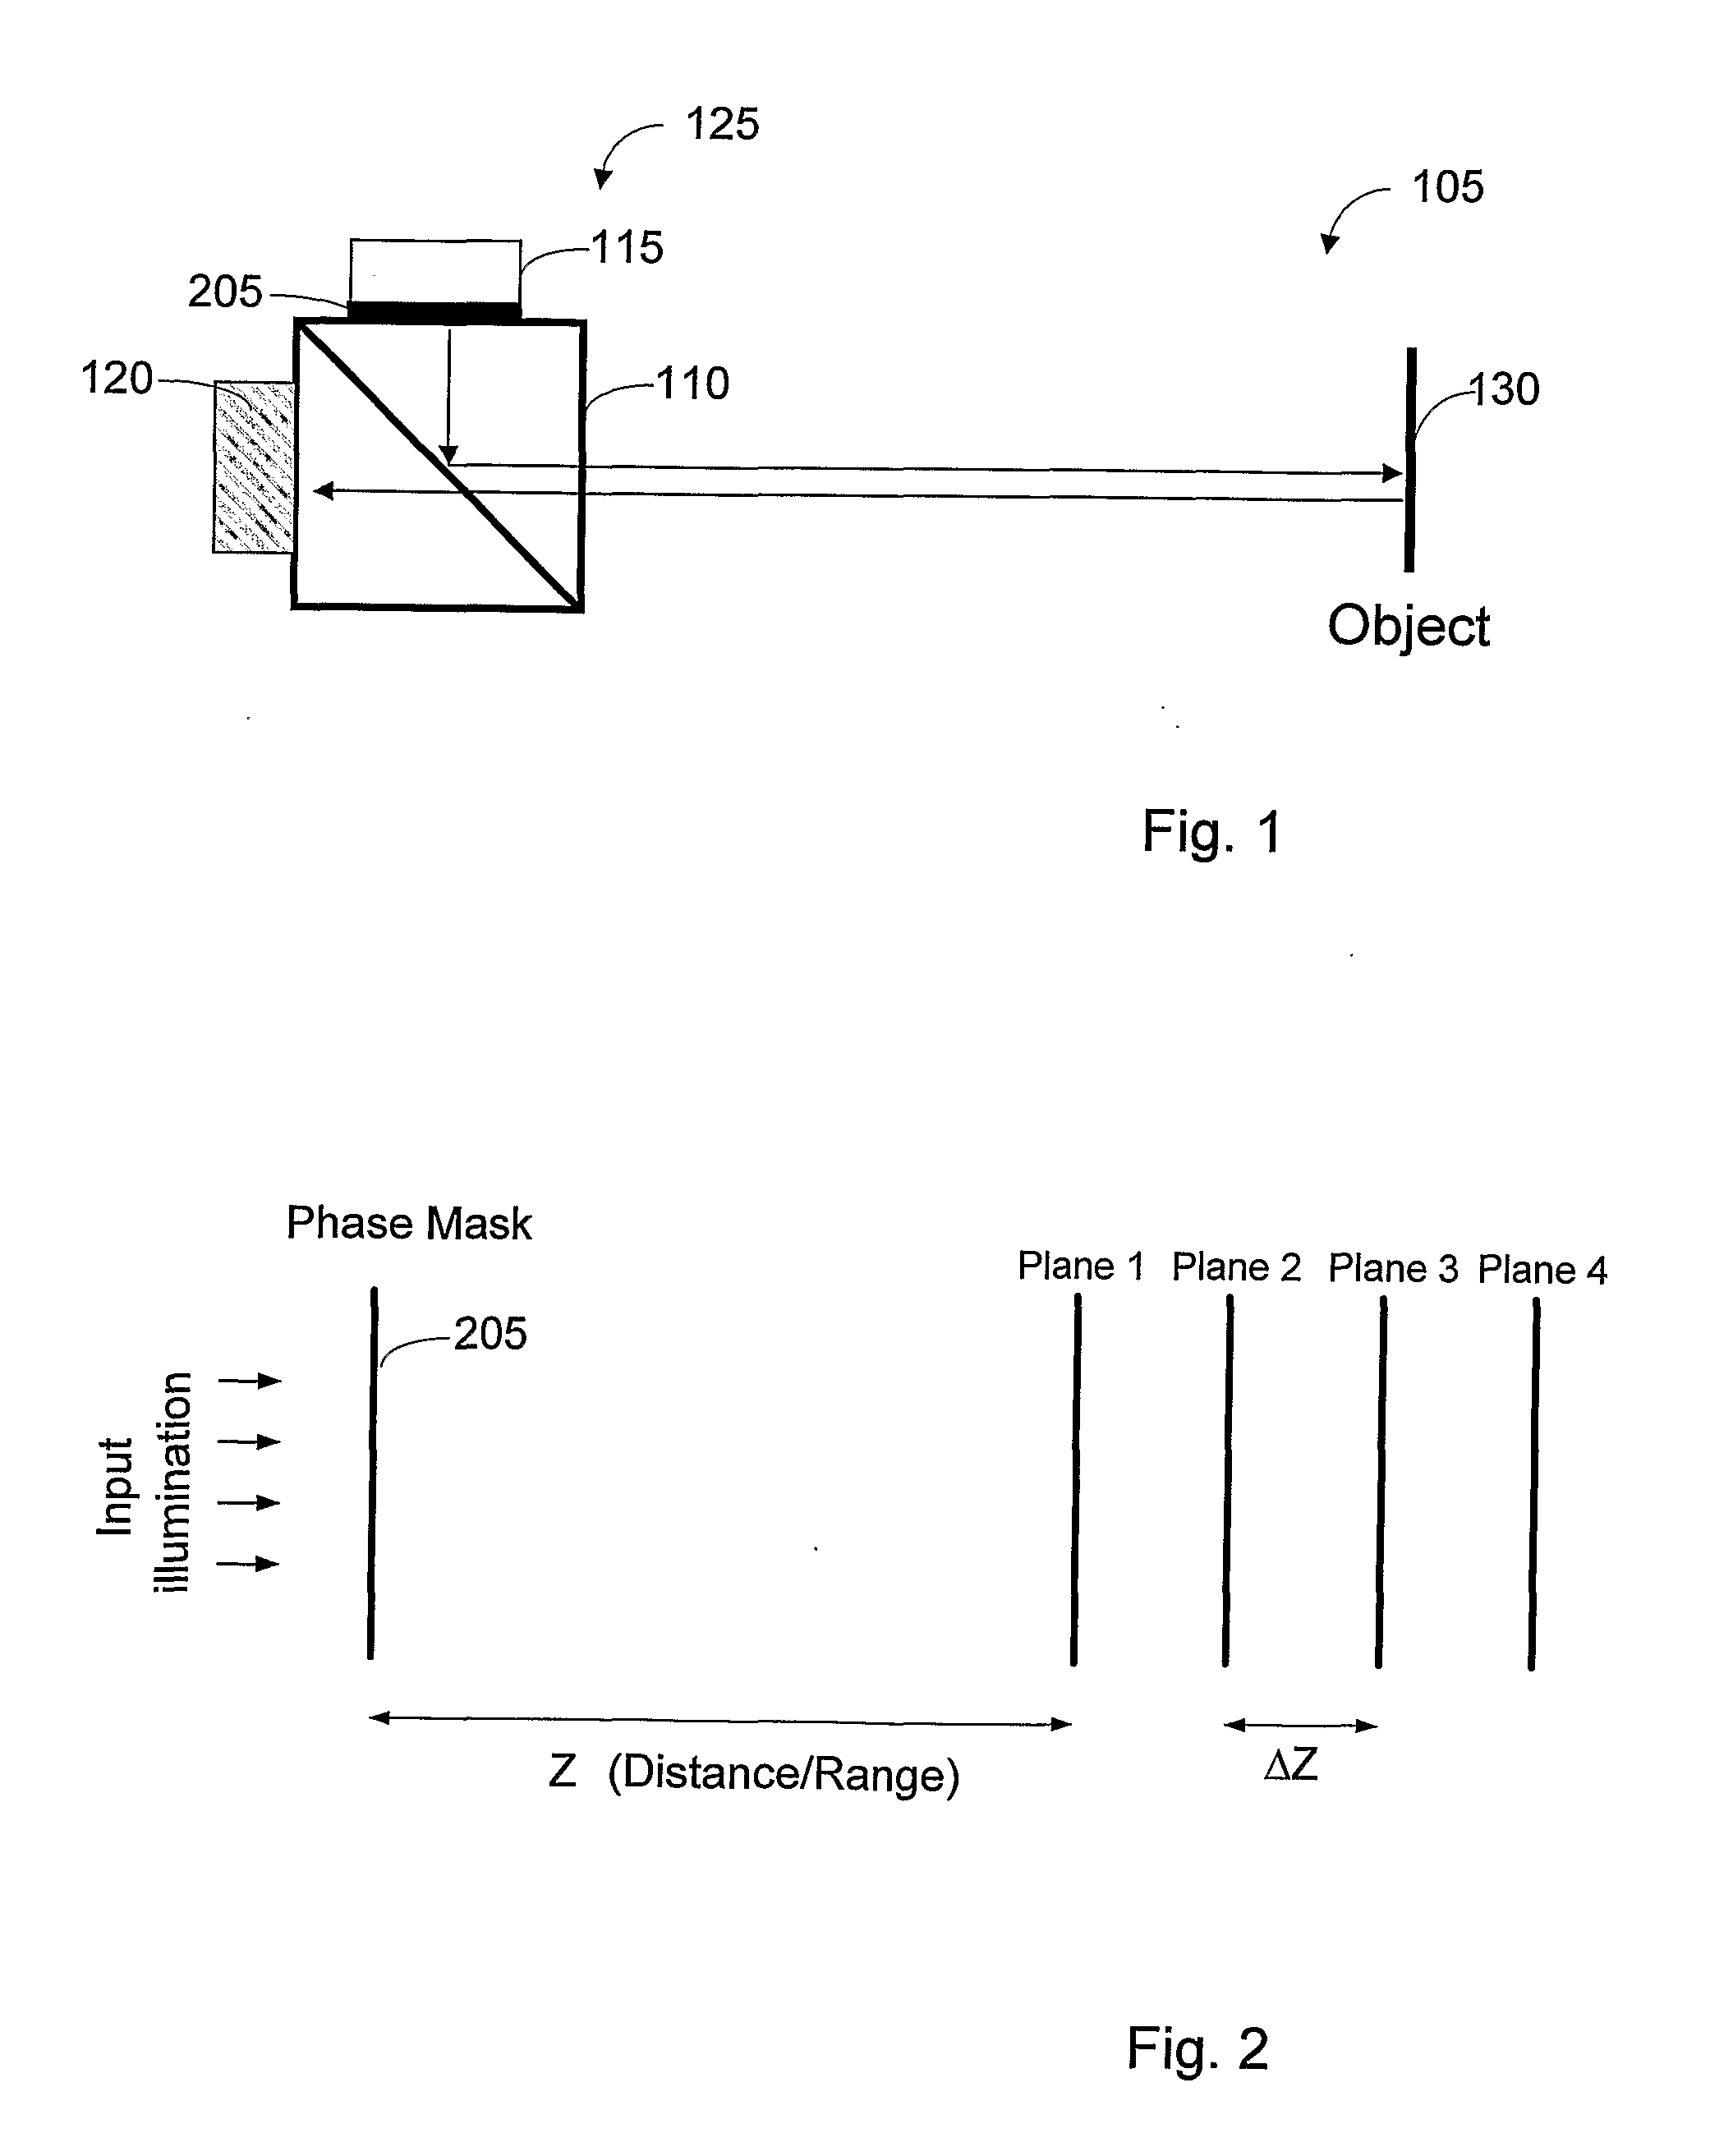 Method and system for providing three-dimensional and range inter-planar estimation